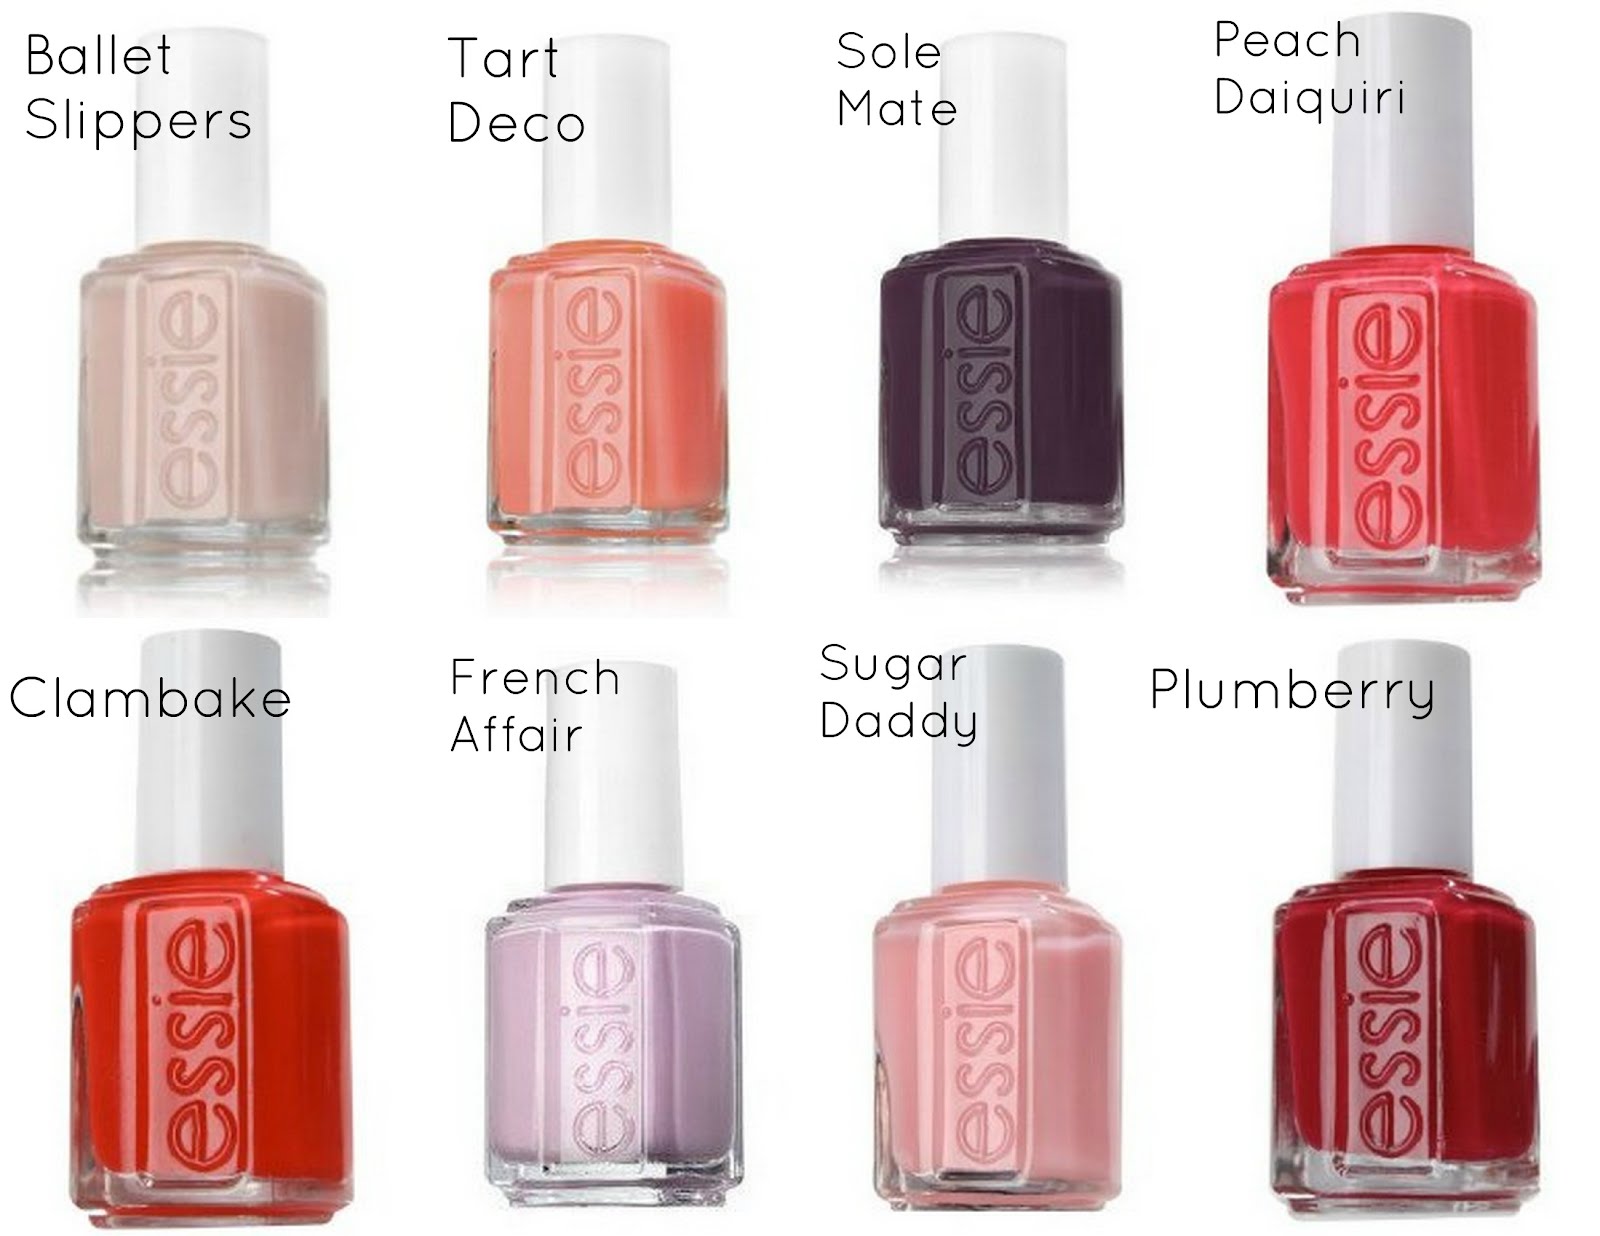 8. Essie Nail Polish - Discontinued Shades and Colors Collection - wide 7